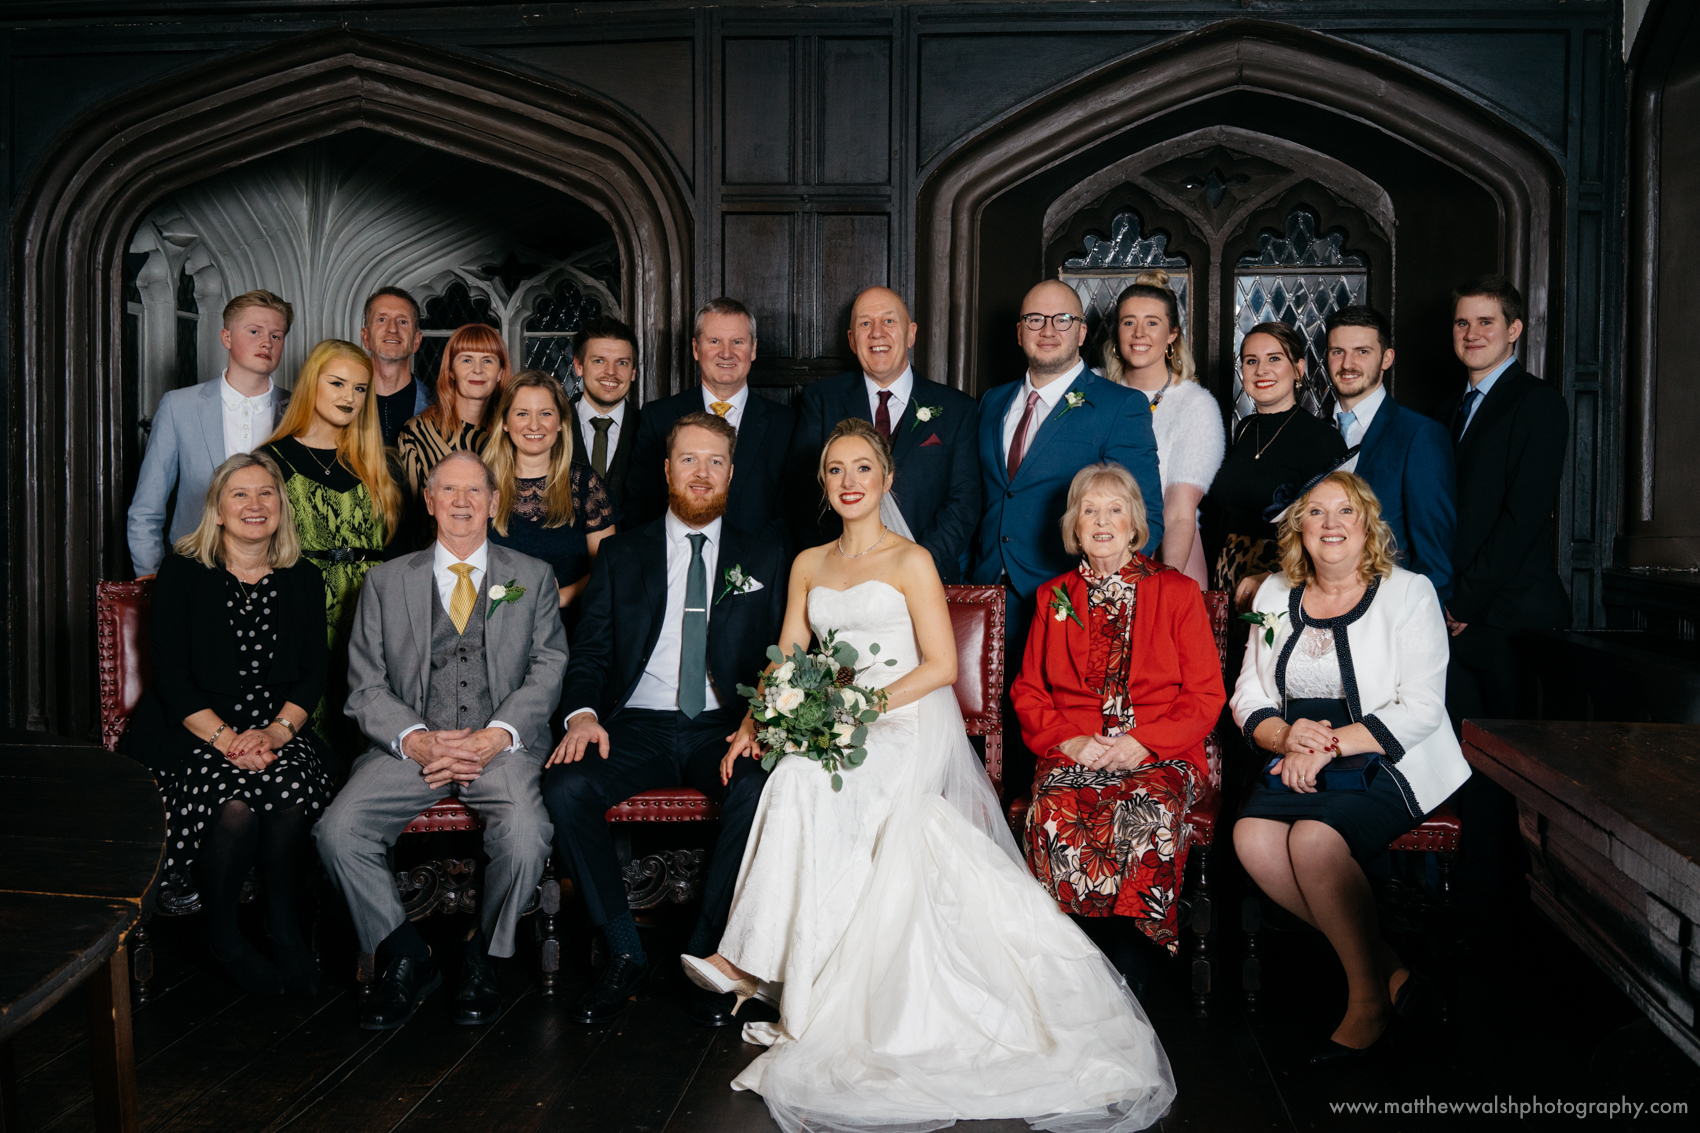 Family photographs are a long tradition at a wedding